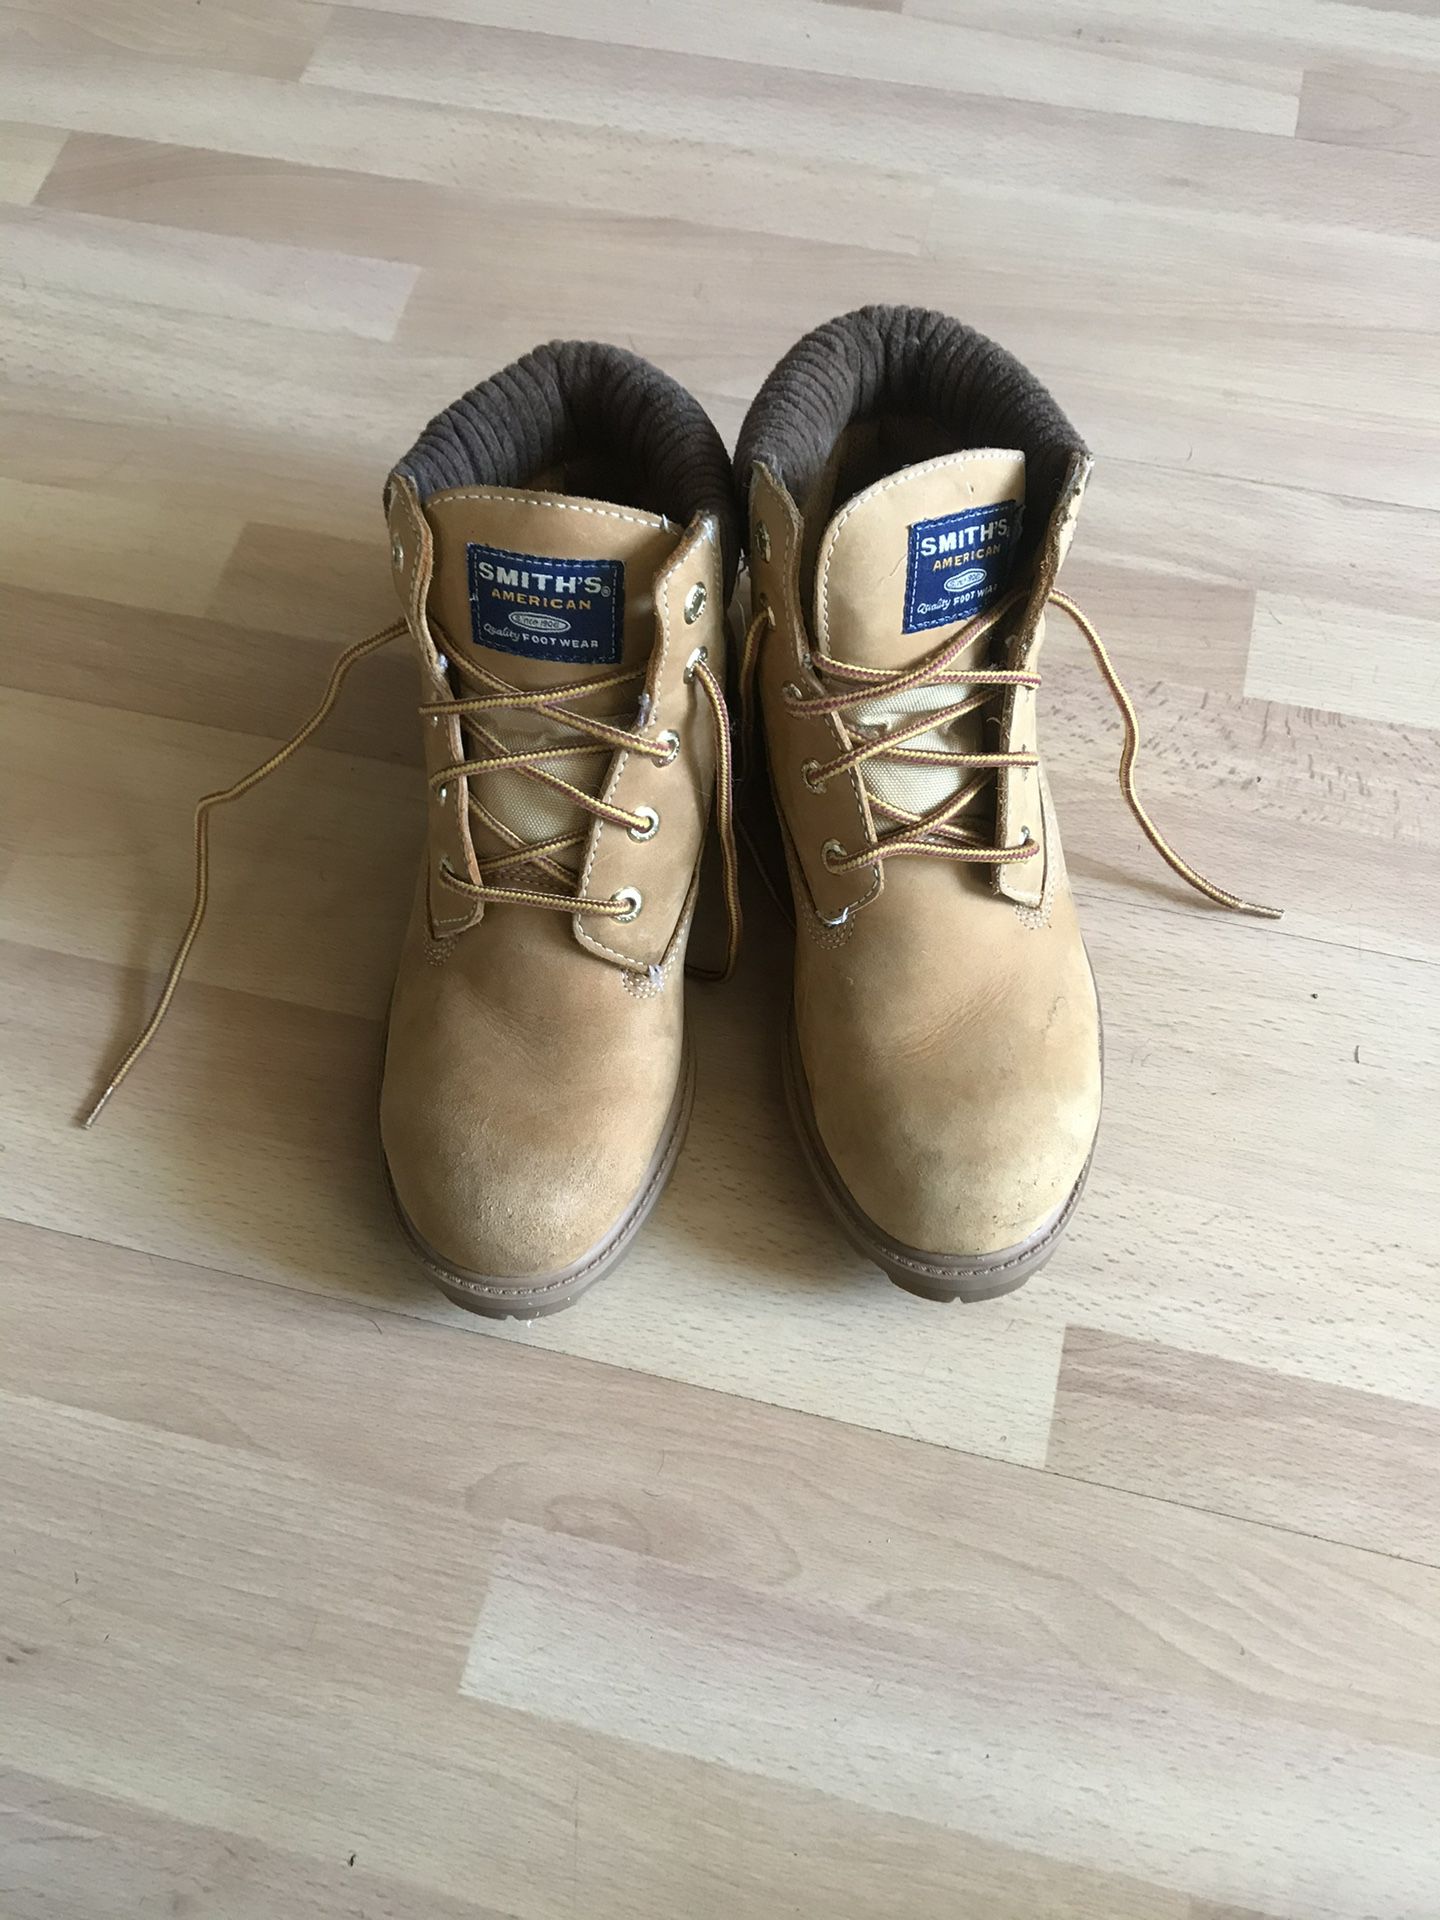 Smiths American Work Boots 